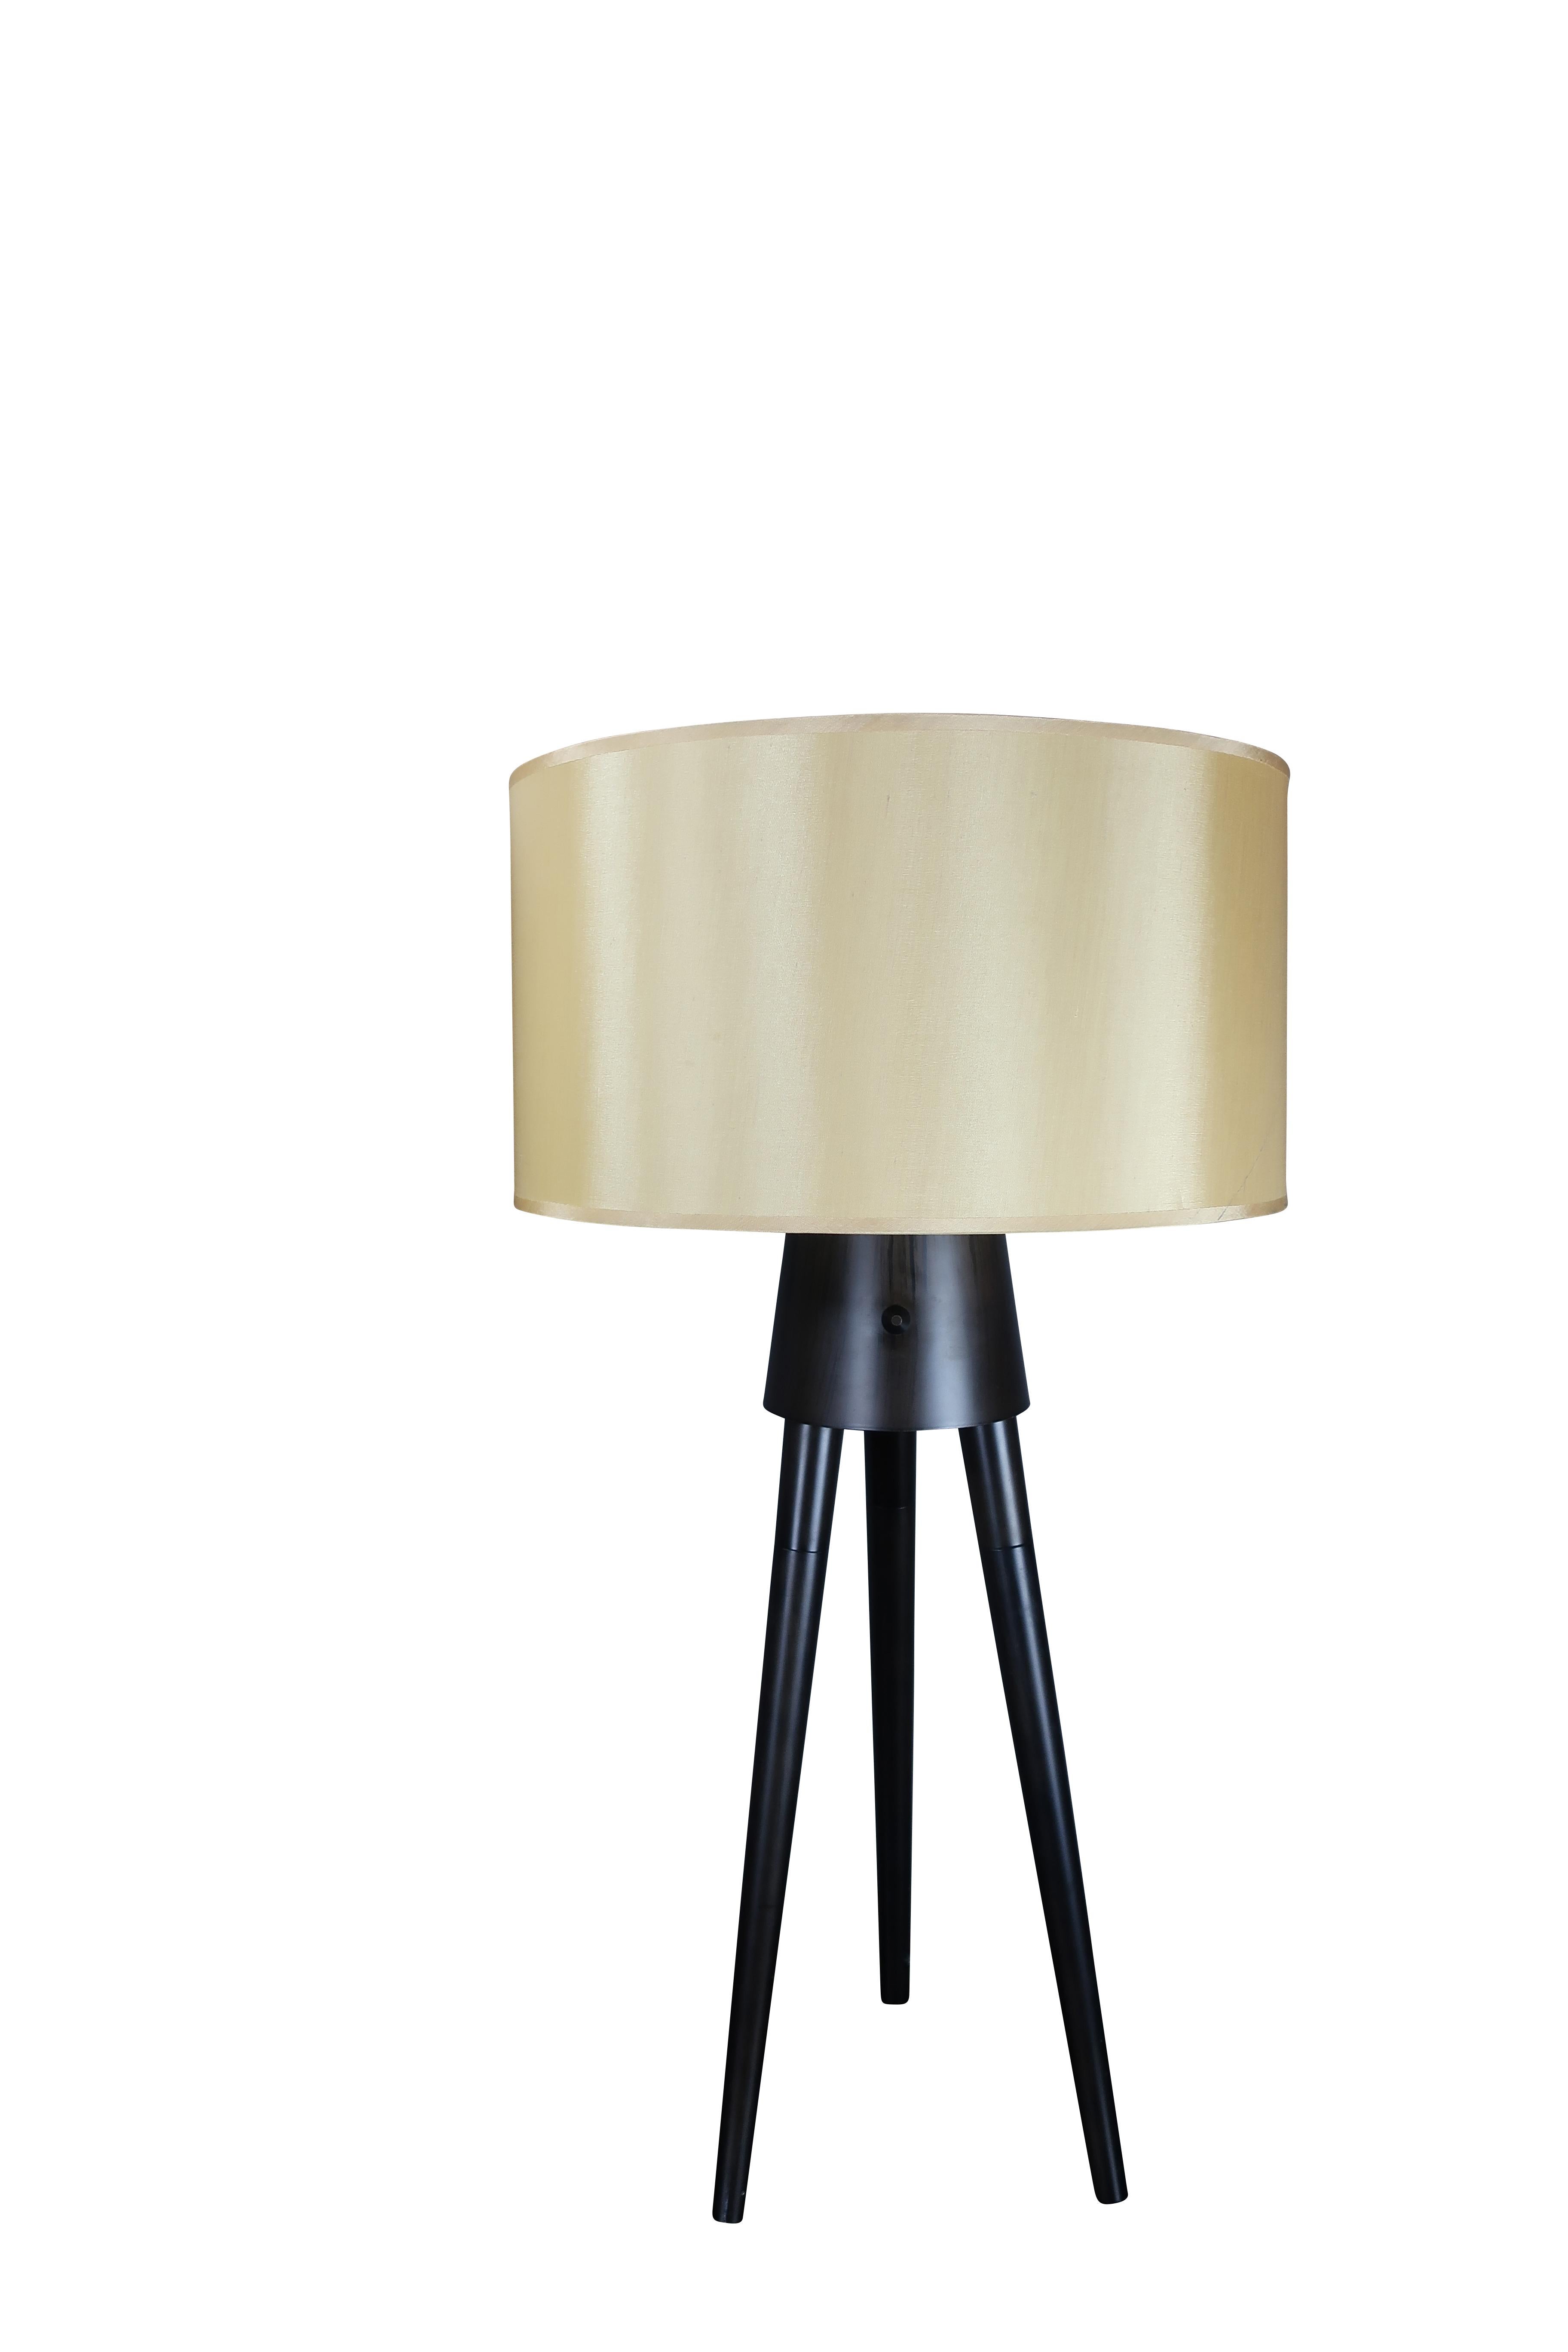 Pair of Midcentury Style Black Tripod Lamps with Champagne Shades In Good Condition For Sale In Essex, MA